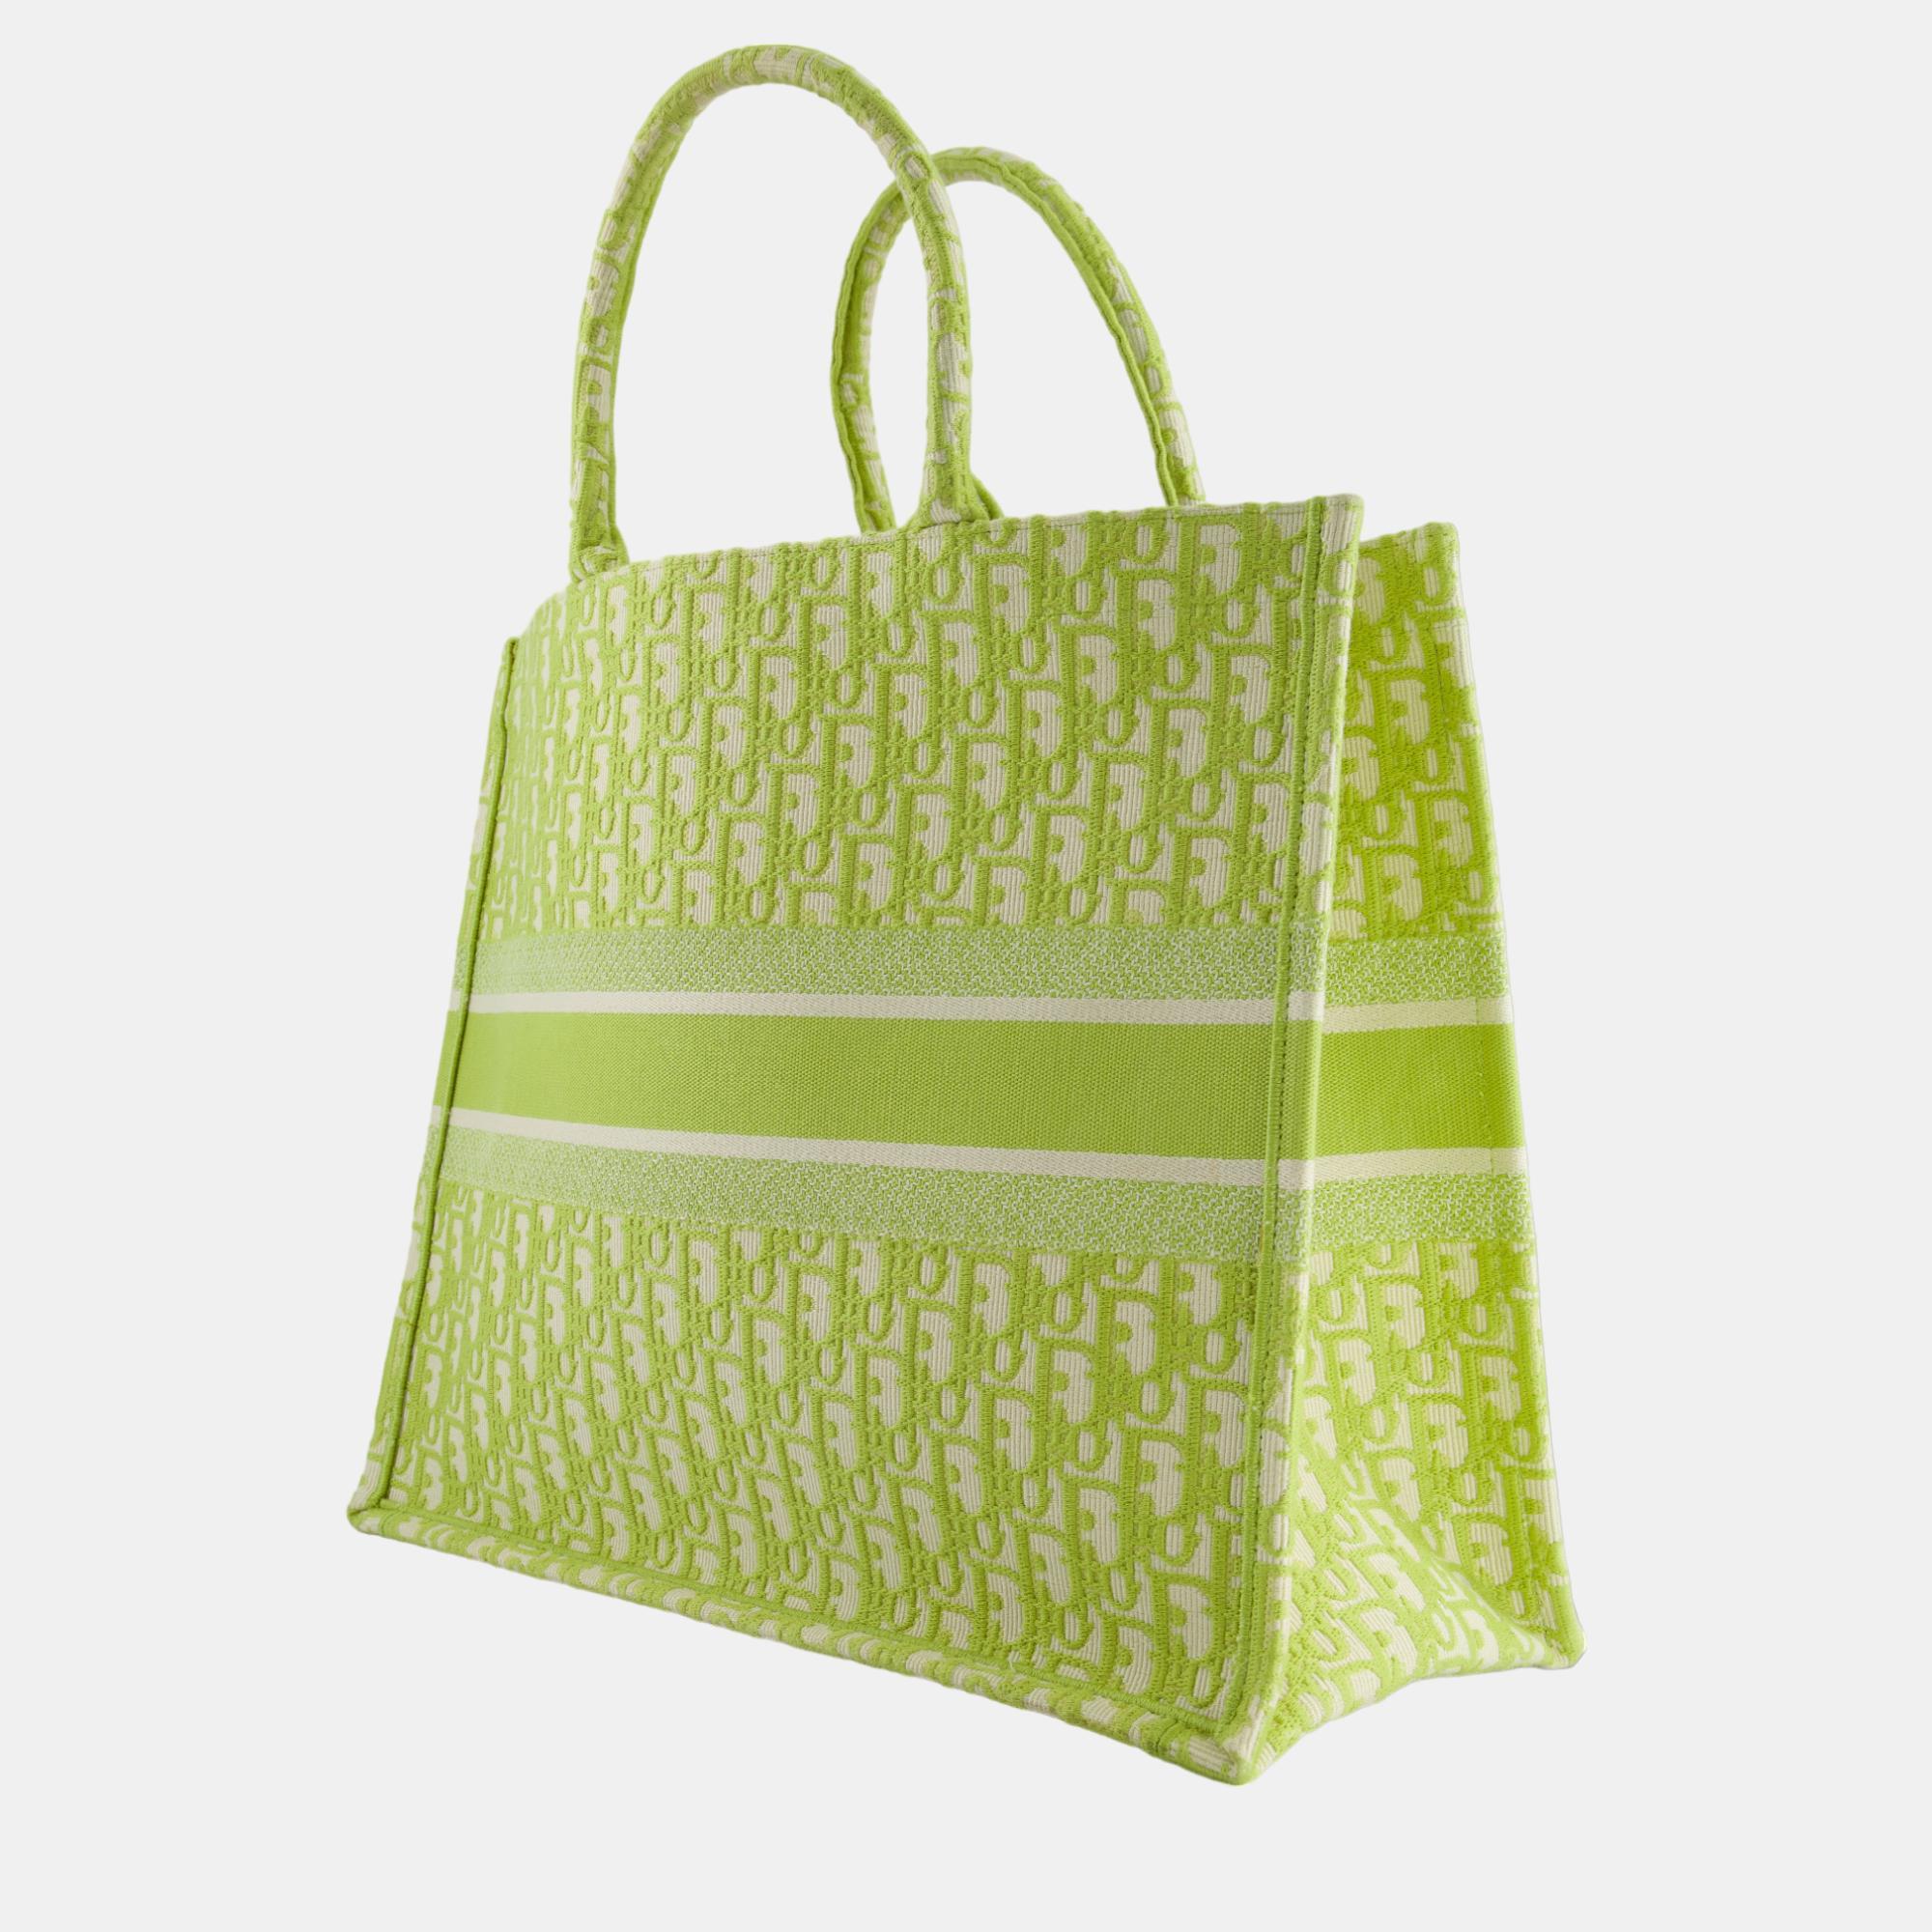 Christian Dior Lime Green Large Oblique Book Tote Bag